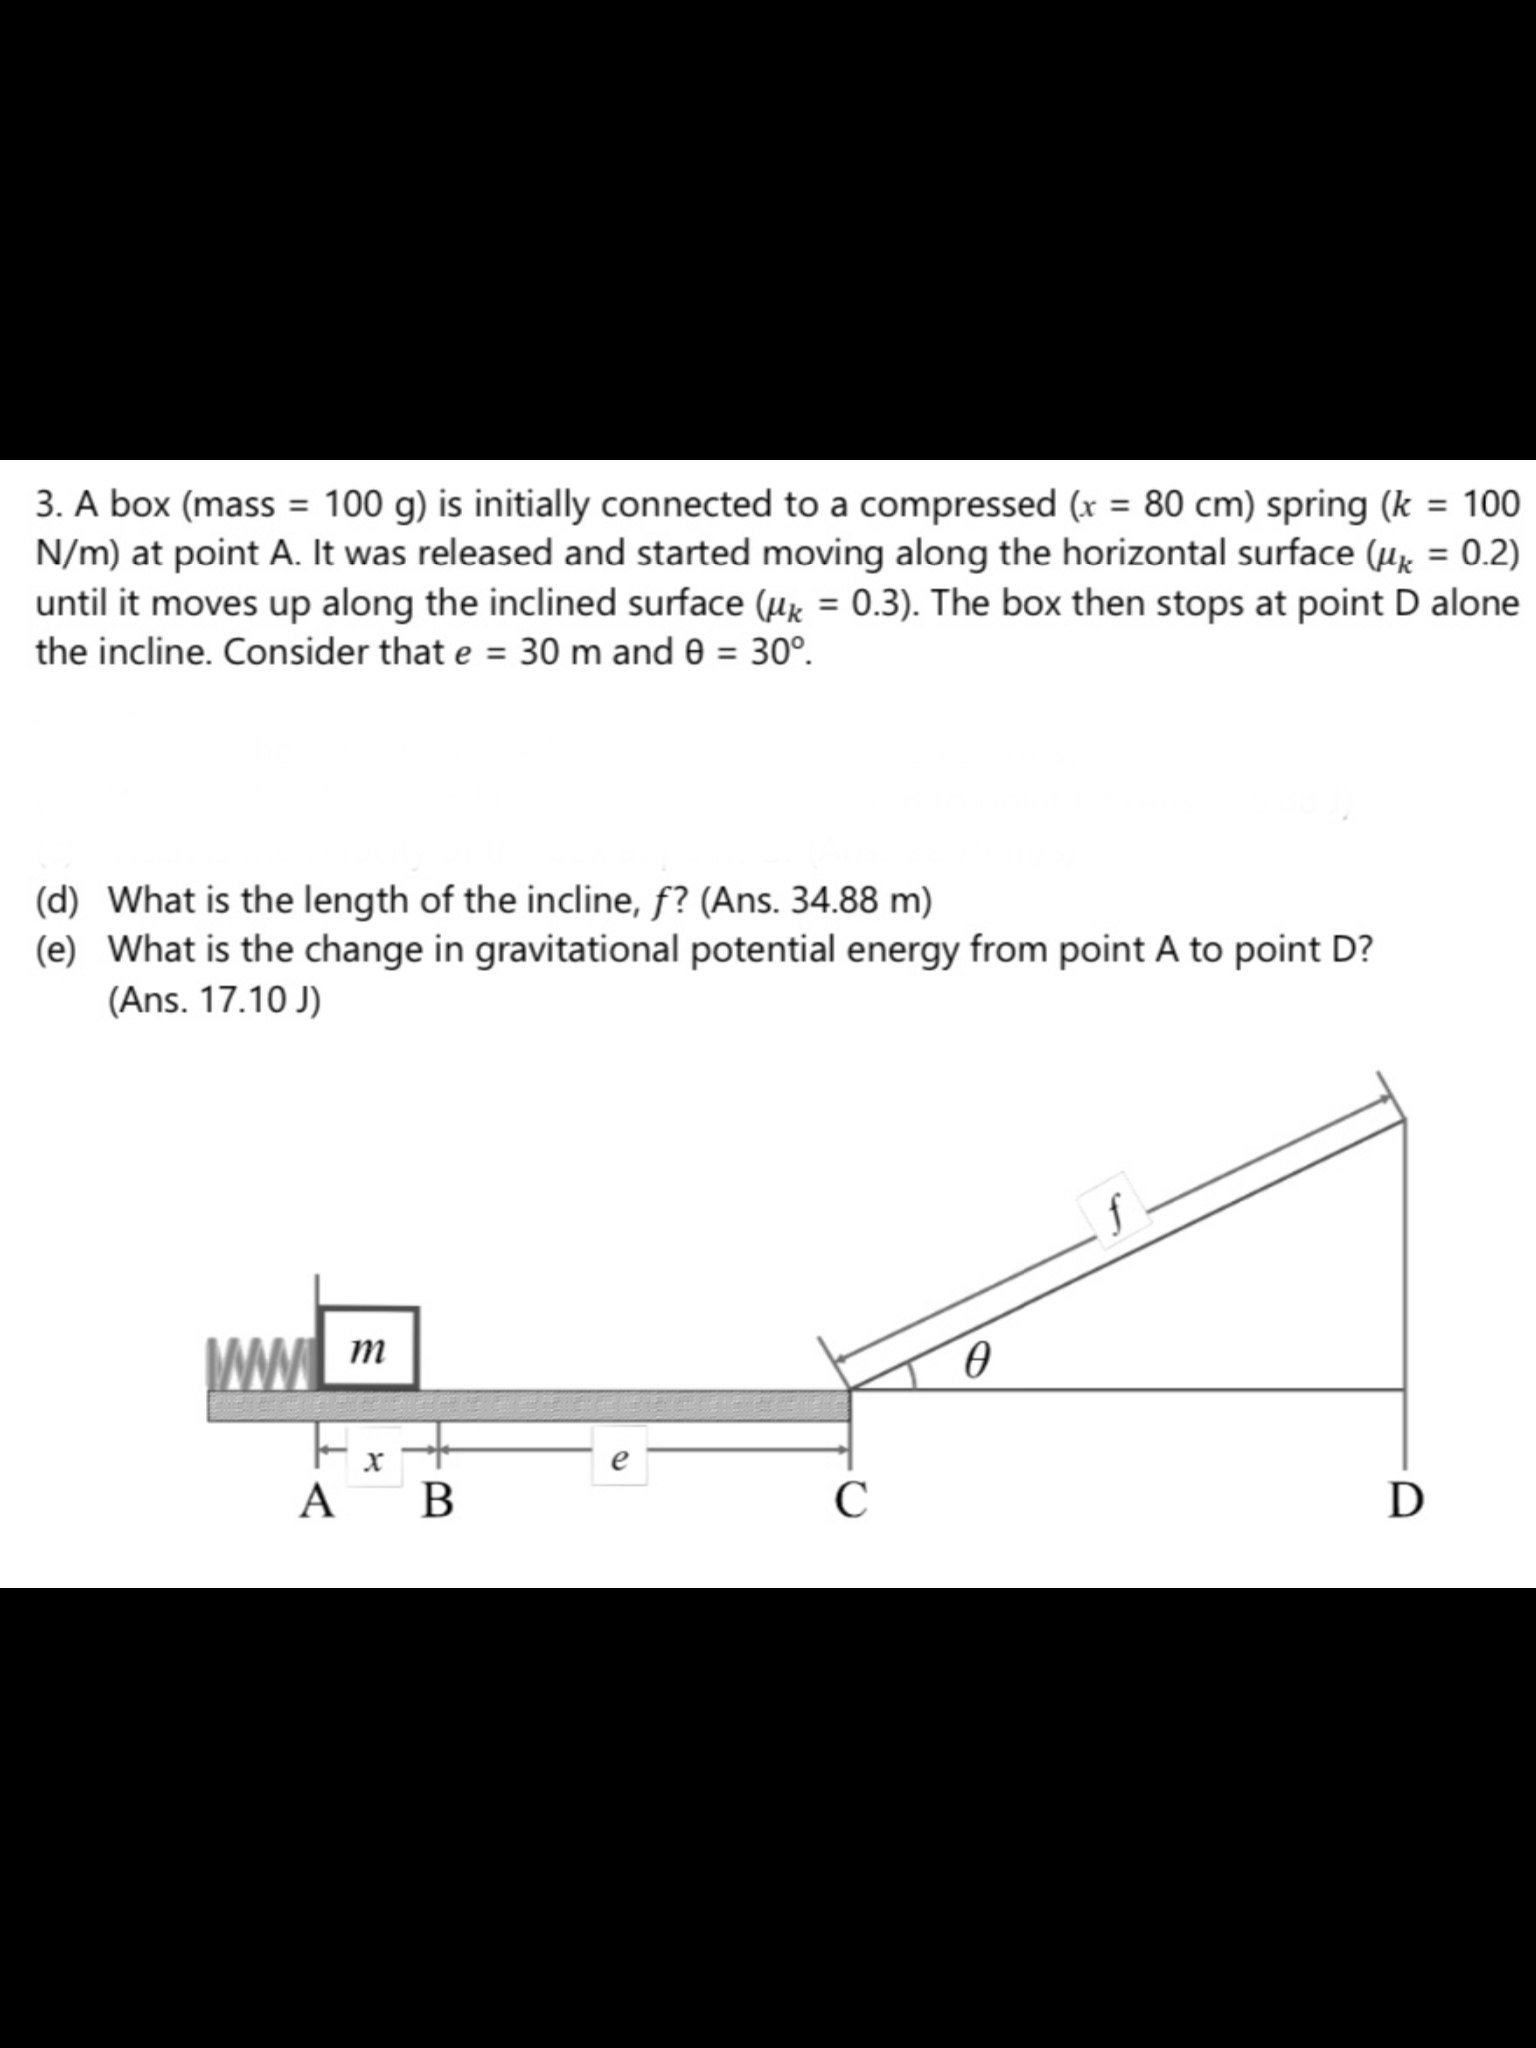 (d) What is the length of the incline, f? (Ans. 34.88 m)
(e) What is the change in gravitational potential energy from point A to point D?
(Ans. 17.10 J)
